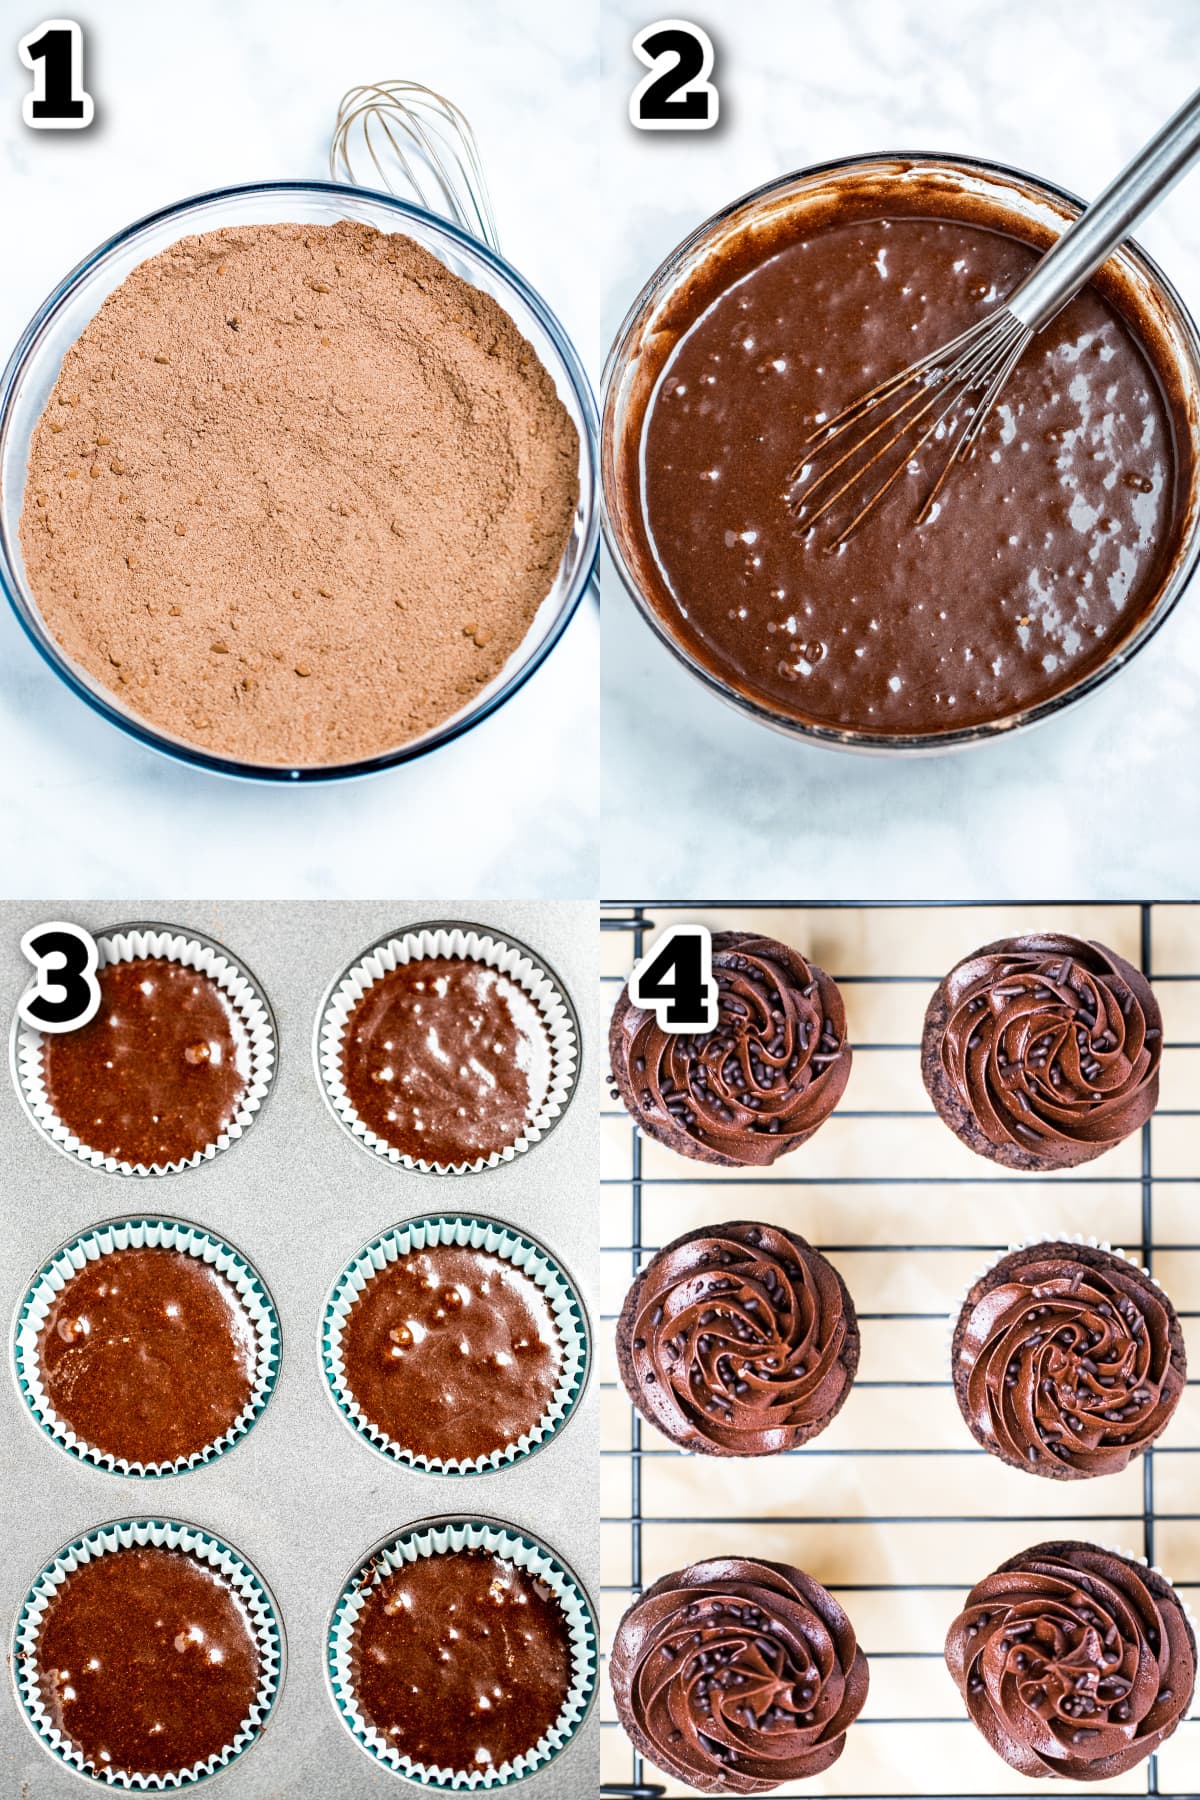 Step by step photos on how to make gluten free chocolate cupcakes.